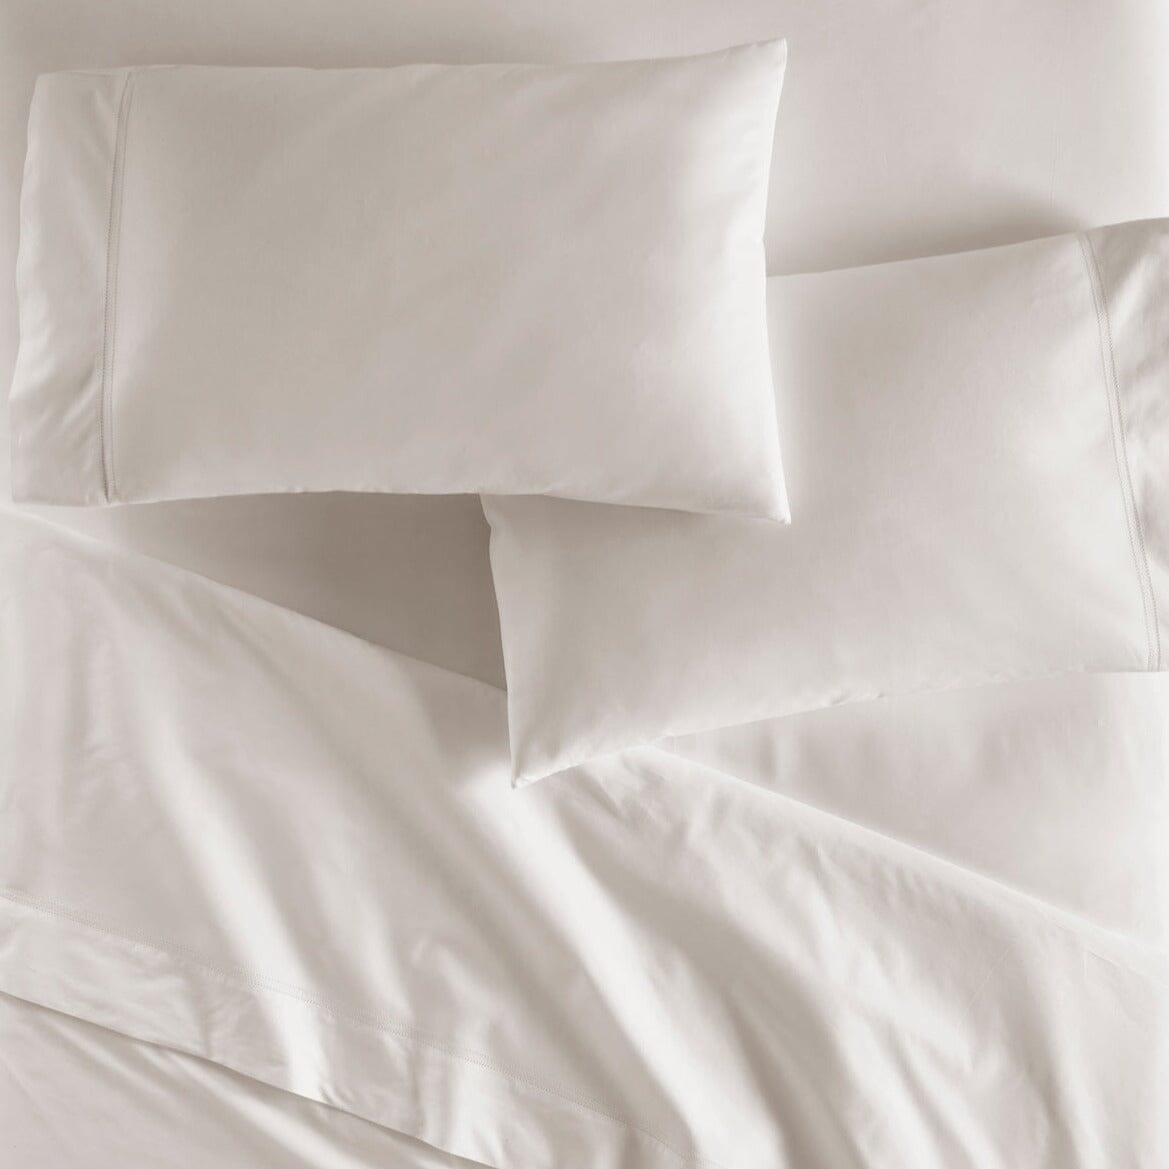 Overview of Pillowcases and Sheets - Peacock Alley Percale Cotton Bedding | Lyric Platinum Linens